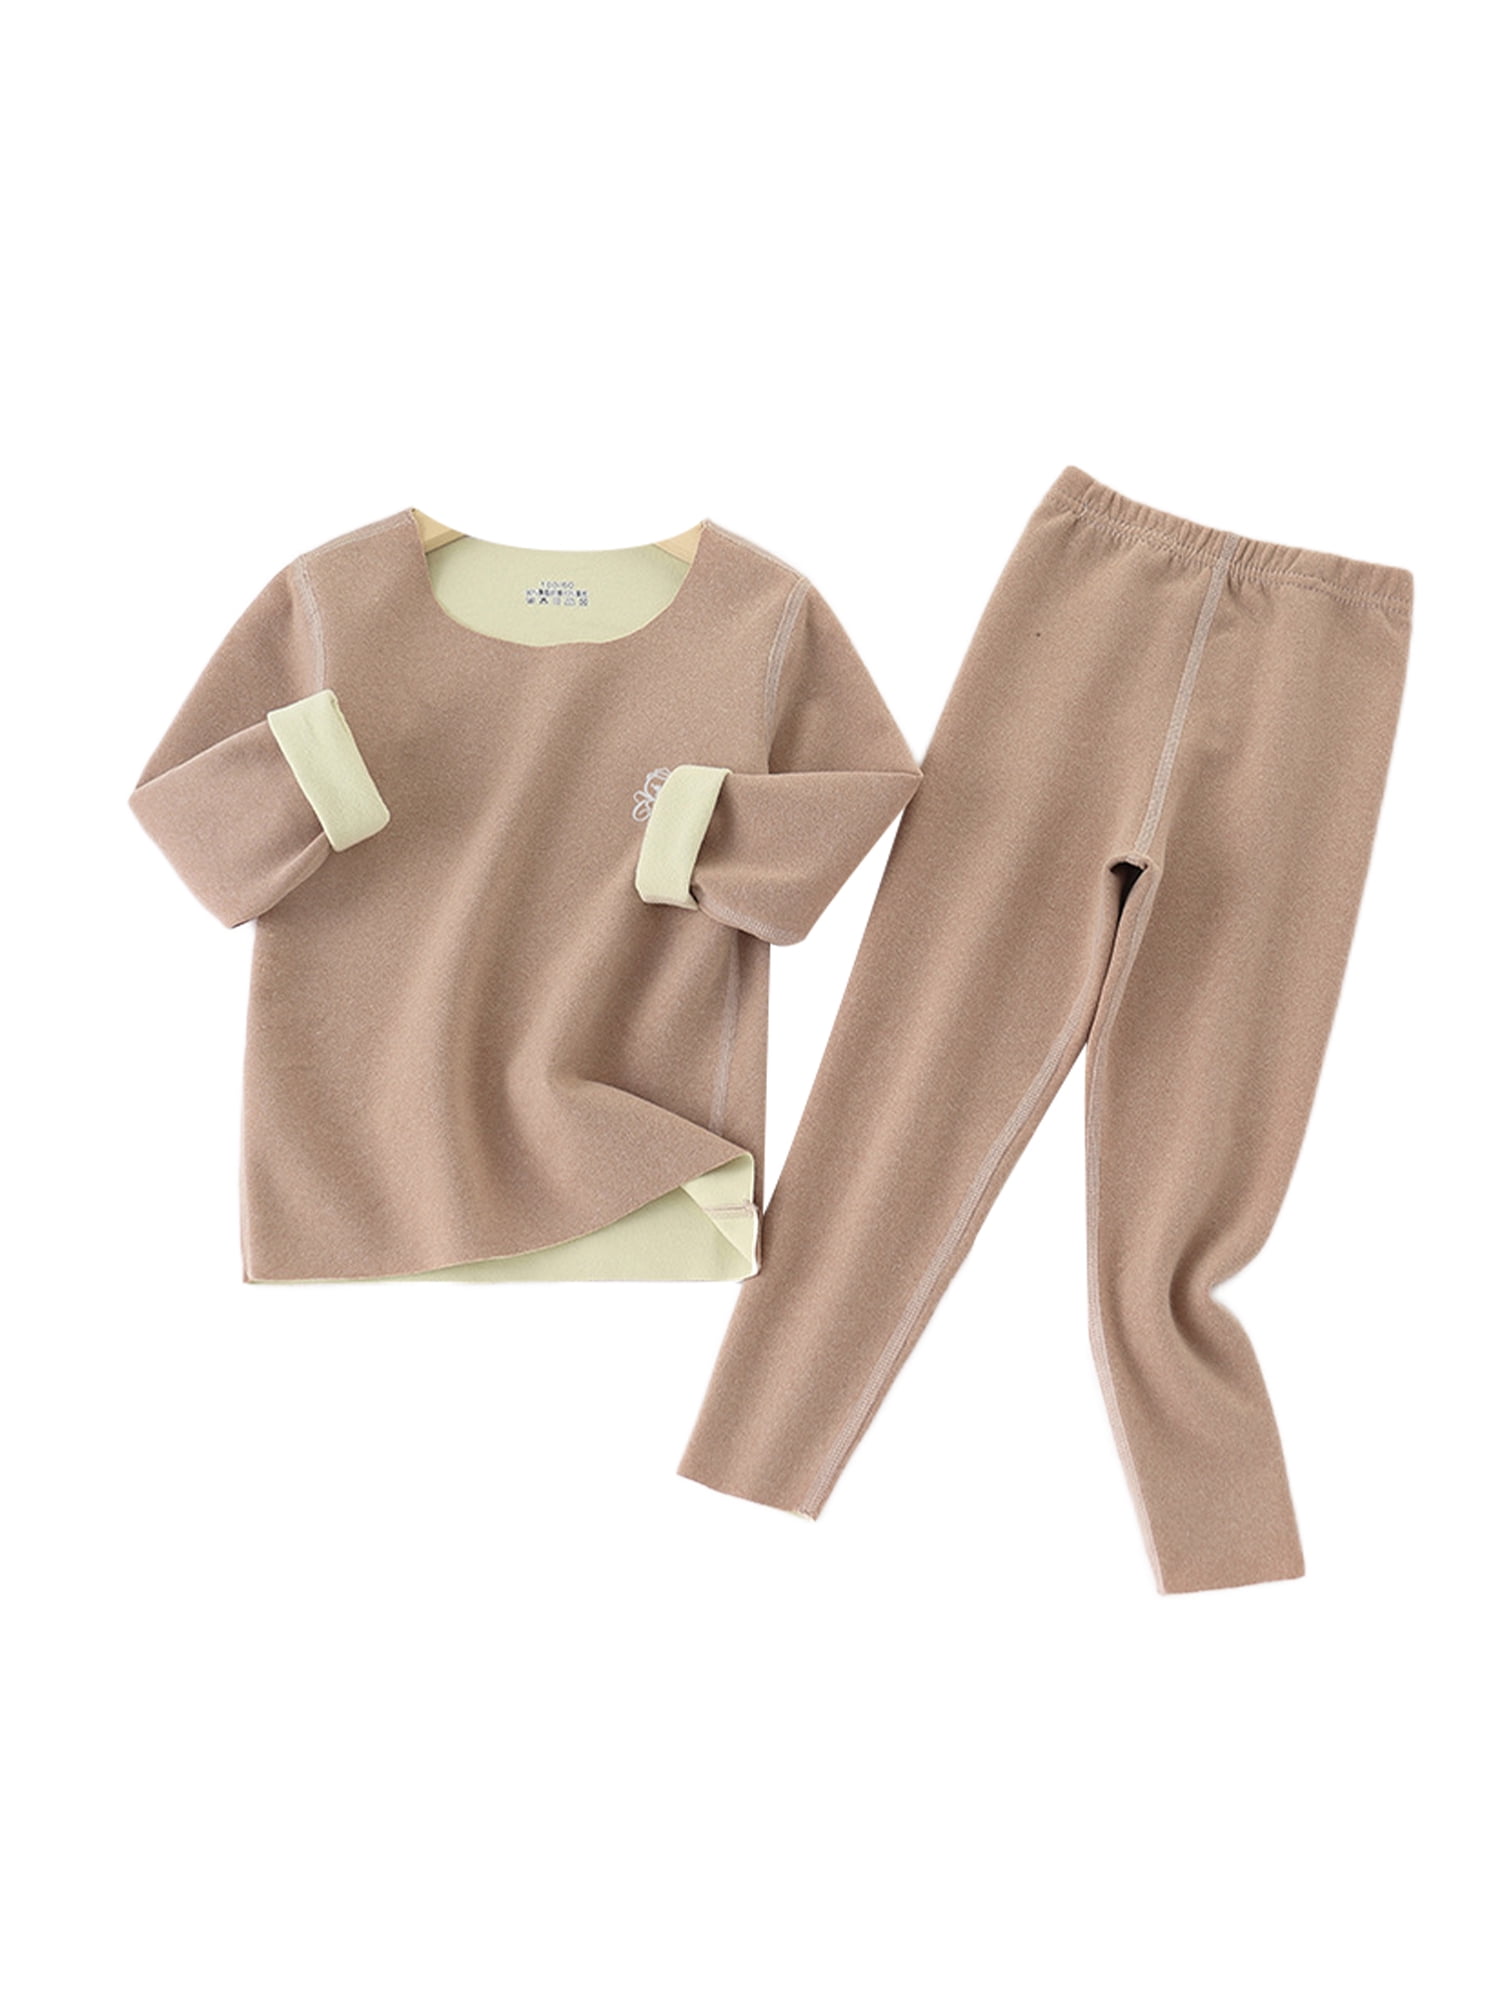 Girls Thermal Underwear Set Kids Winter Cotton Thermal Top and Bottom Warm  Base Layer Solid Color with Flower Brim